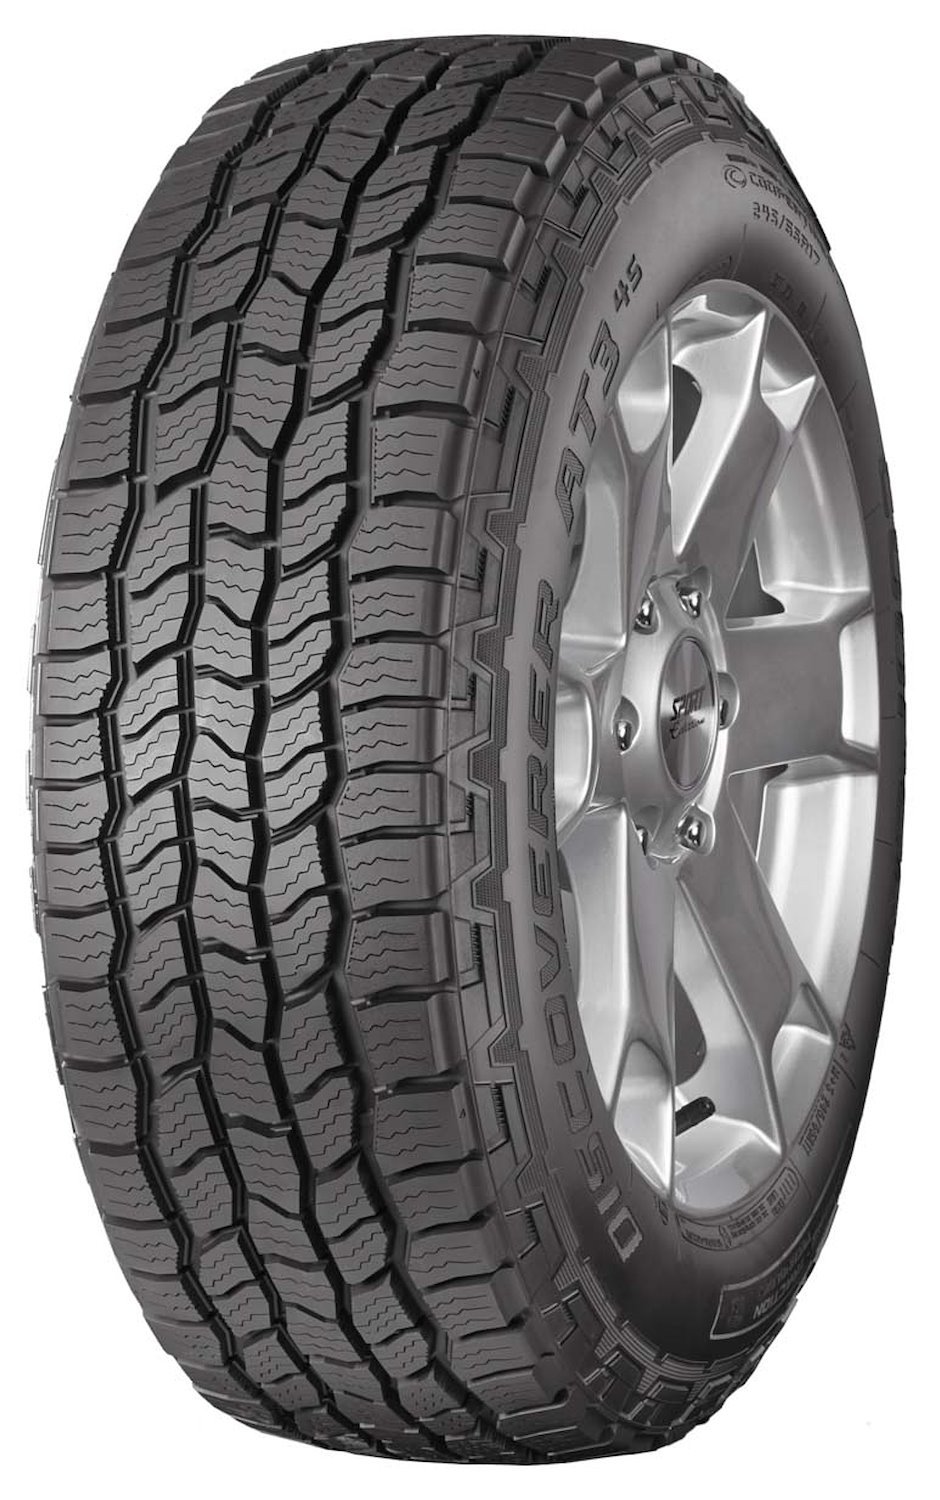 Discoverer AT3 4S All-Terrain Tire, 255/70R17